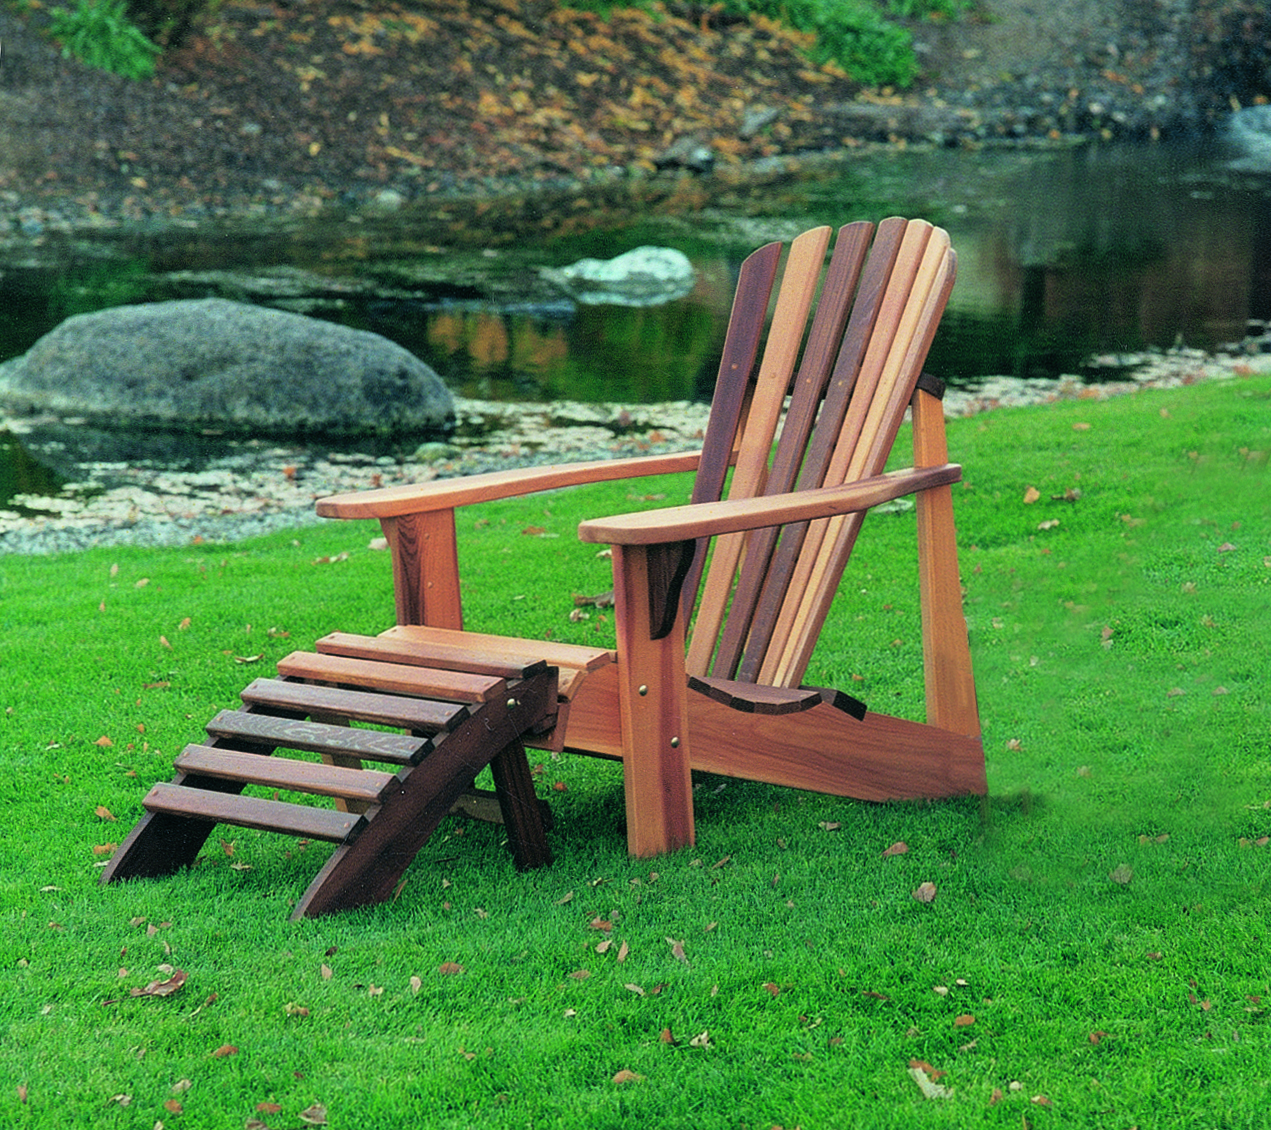 Wood Types for Adirondack Chairs - Wood Country